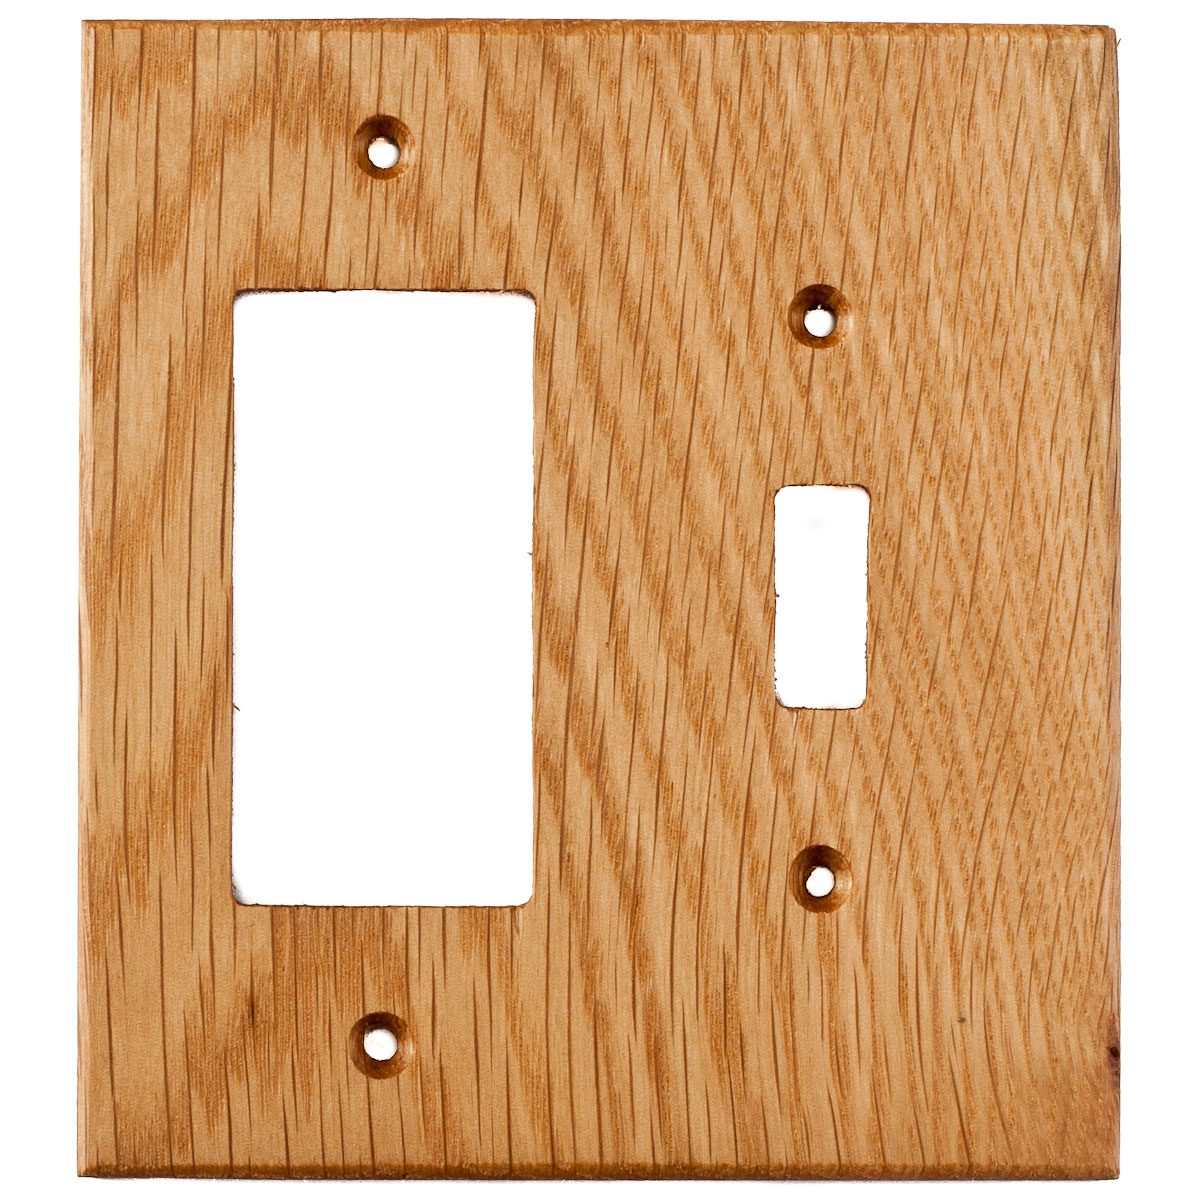 Oak Wood Wall Plate - 2 Gang Combo - Light Switch, GFCI Outlet Cover -  Virgin Timber Lumber